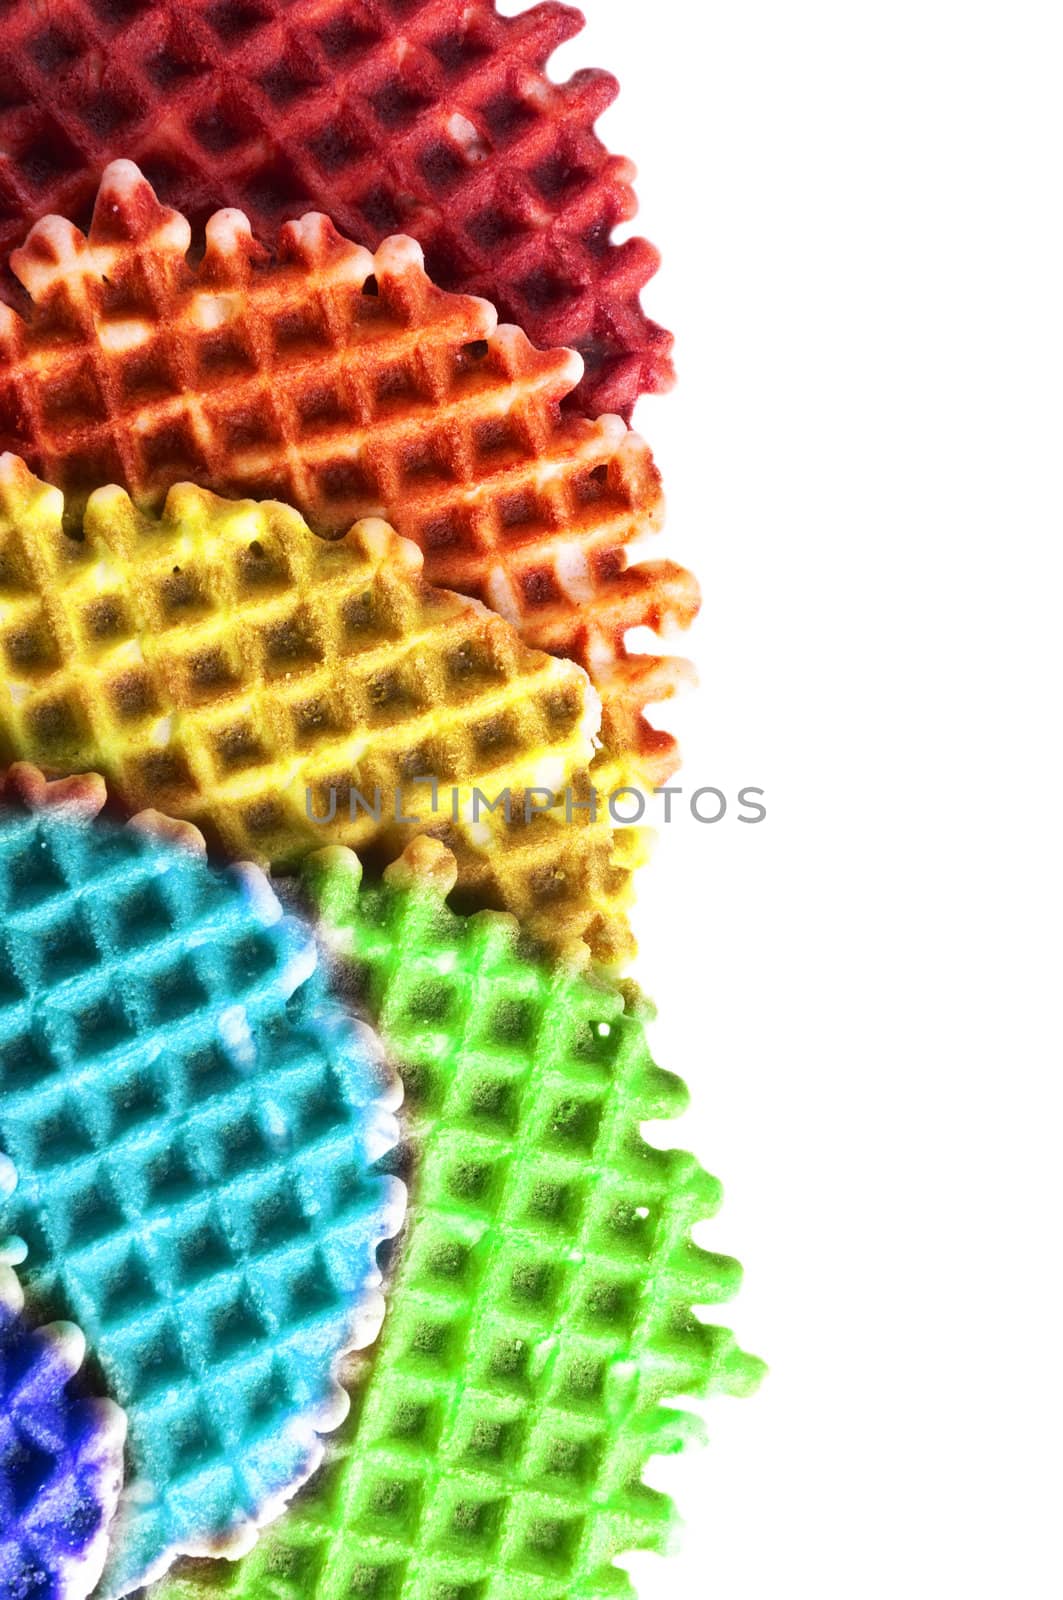 Wafer multi-colored background by LeksusTuss